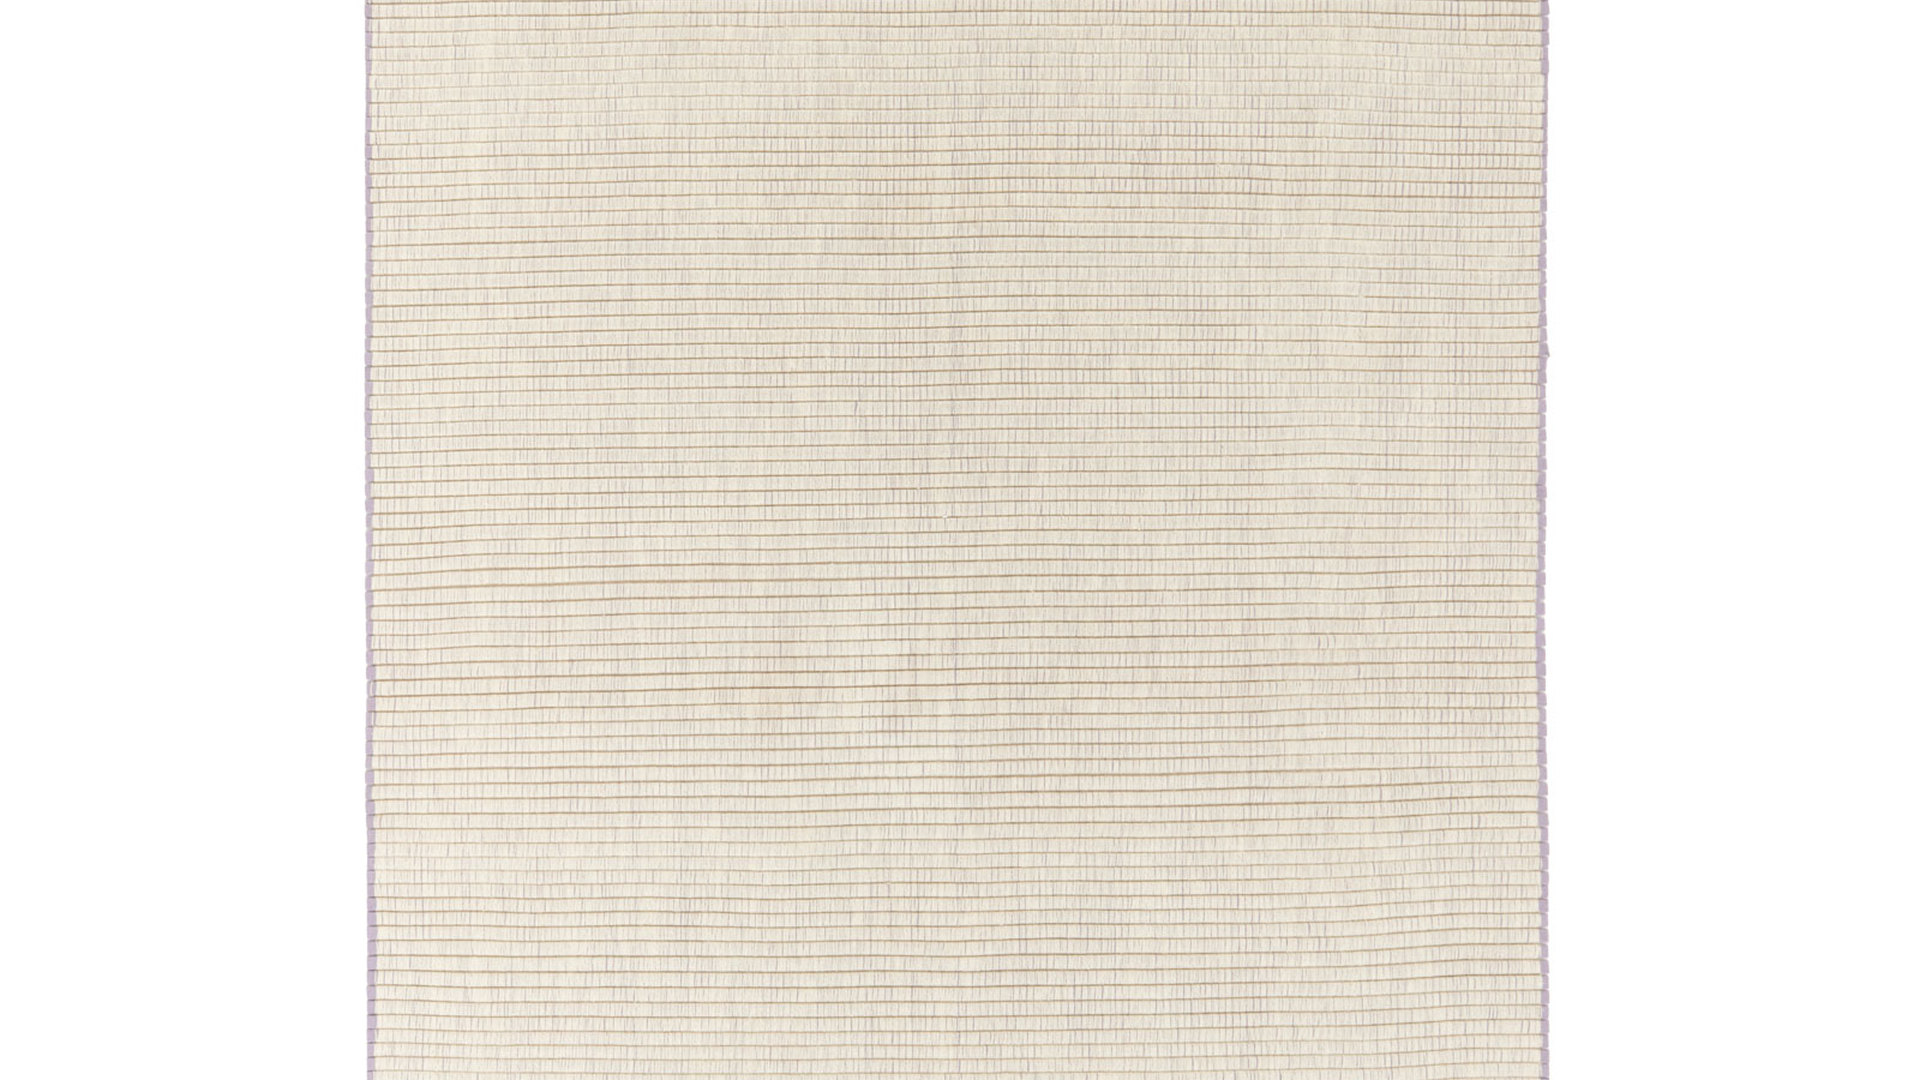 cc-tapis_Omote_collection_MaeEngelgee_rug_small_01.jpg